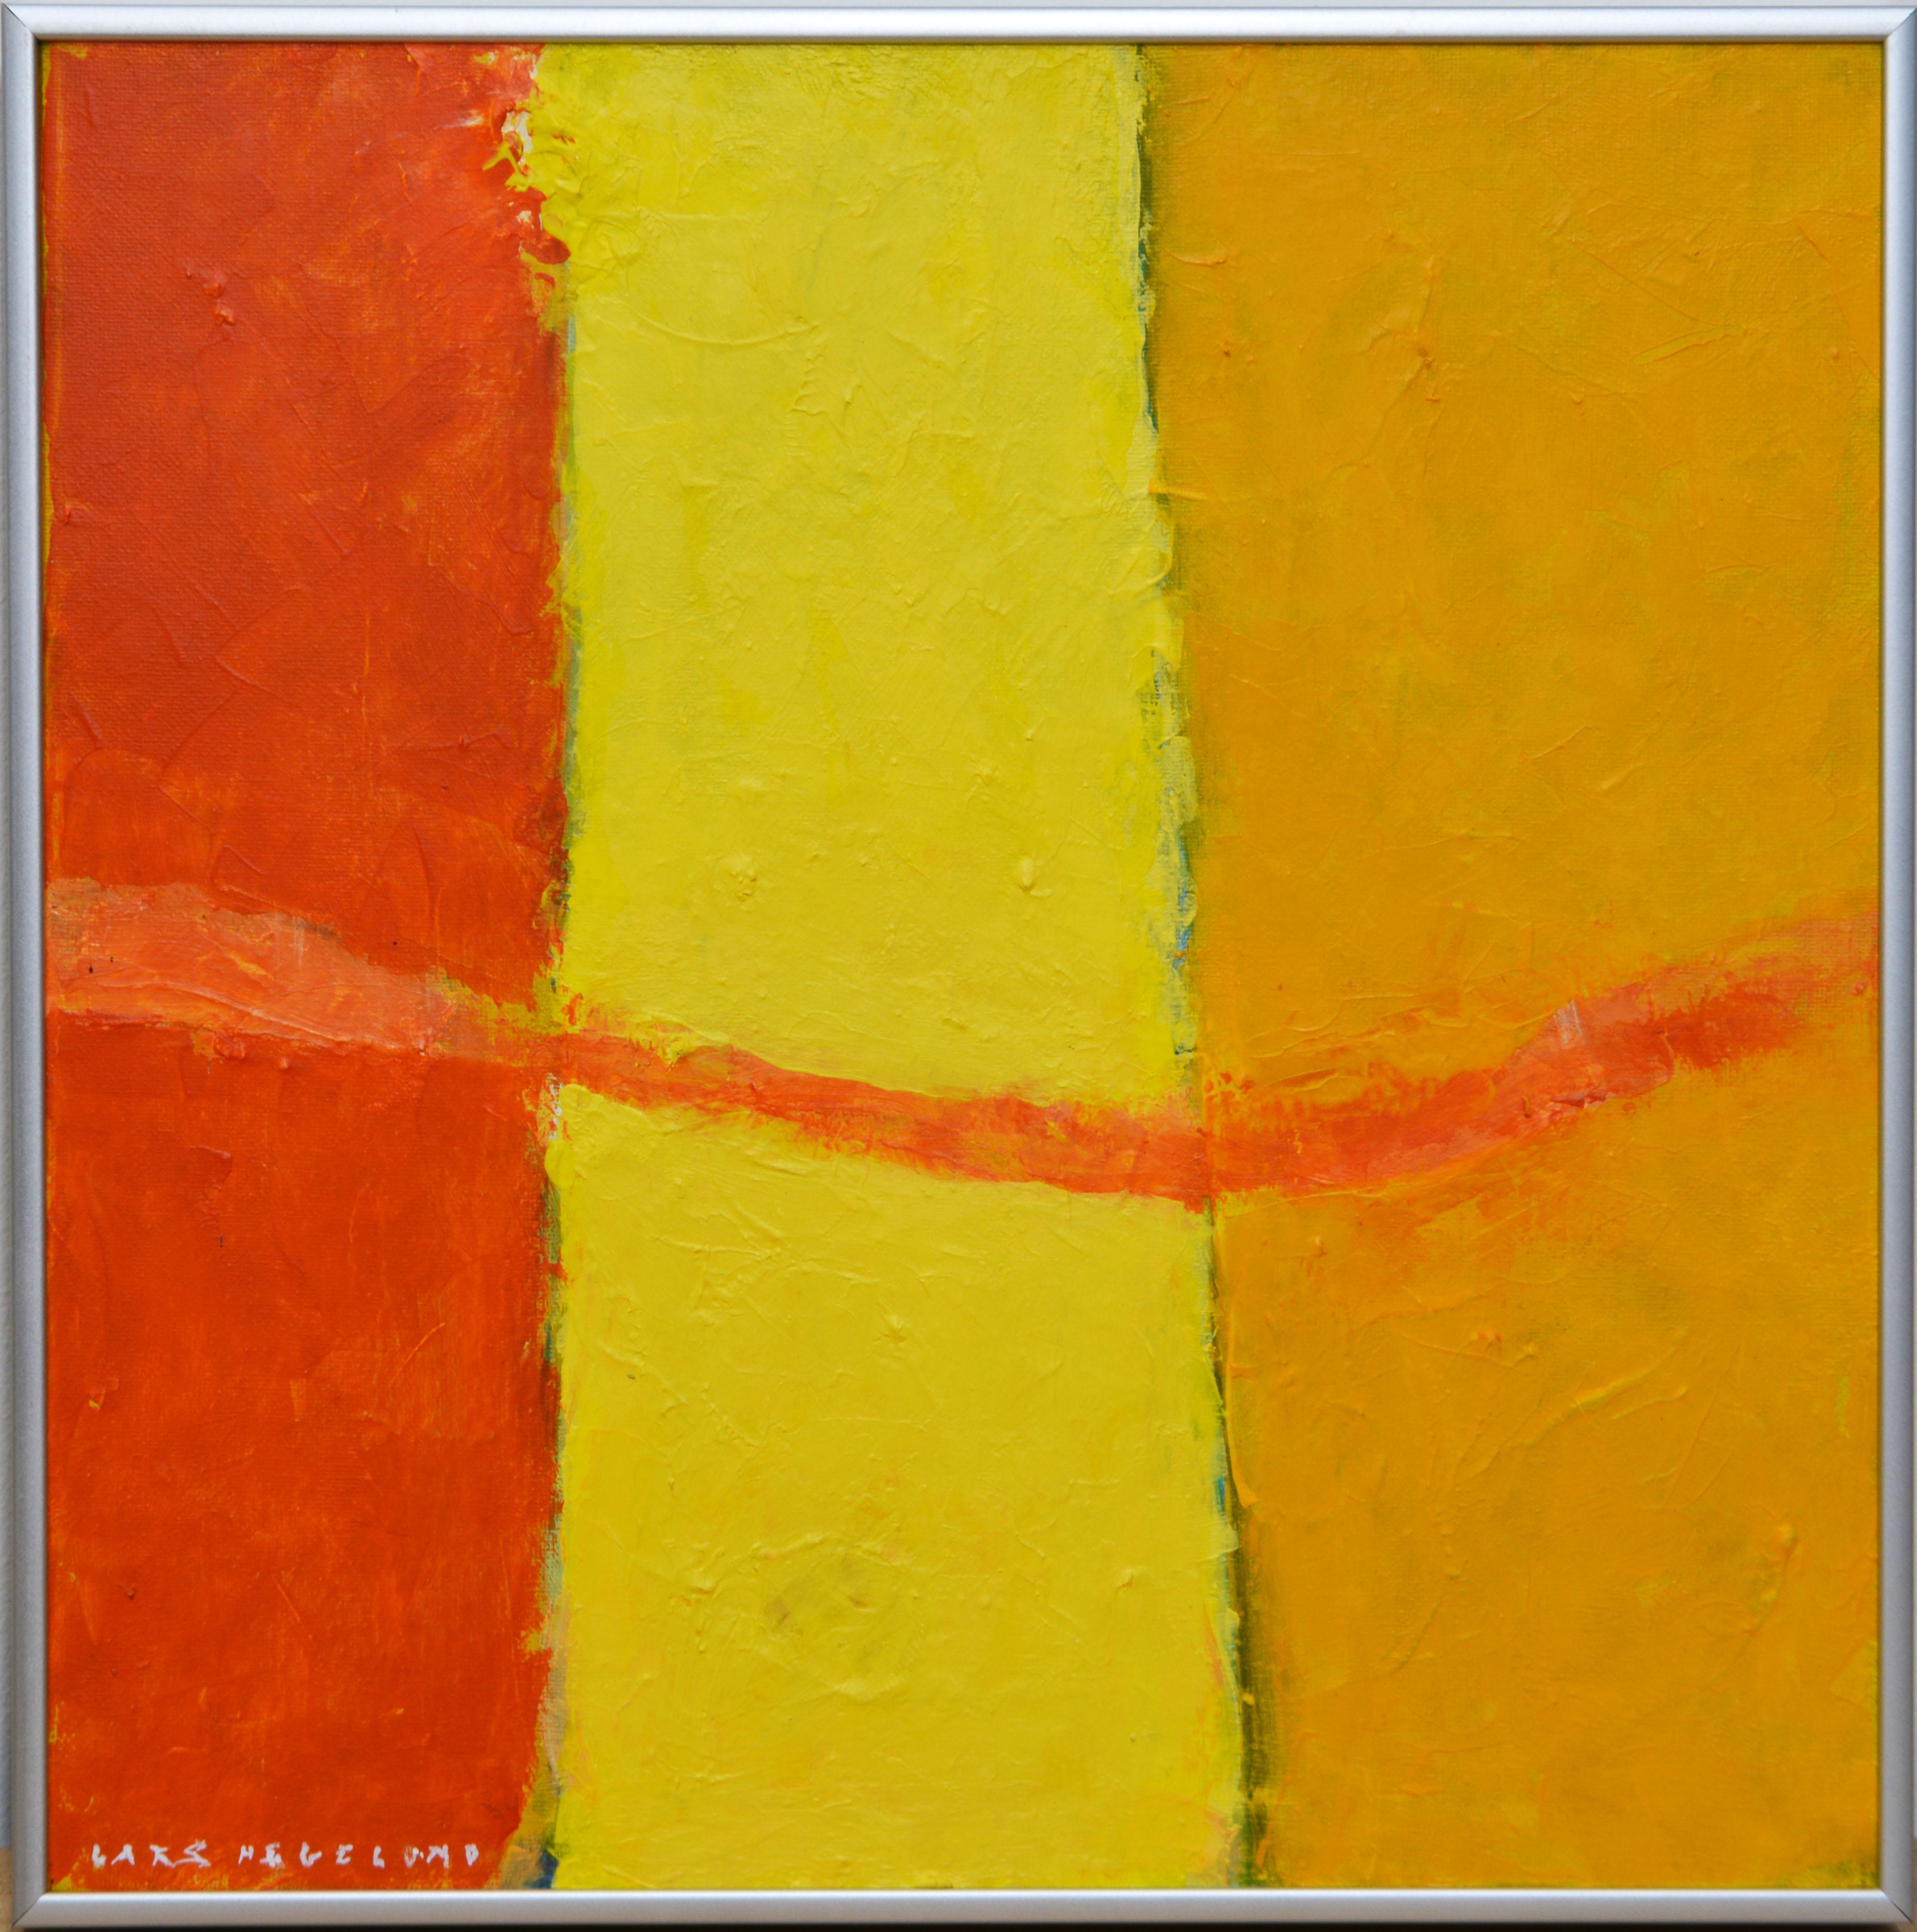 Sometimes less is more. This work is all about color, texture, edges and a poetic composition that stays alive.

'Flow'
by Lars Hegelund, American b. 1947.
Acrylic and Oil on Canvas, signed.
Measures: 14 x 14 in. w/o frame, 14.5 x 14.5 in. including